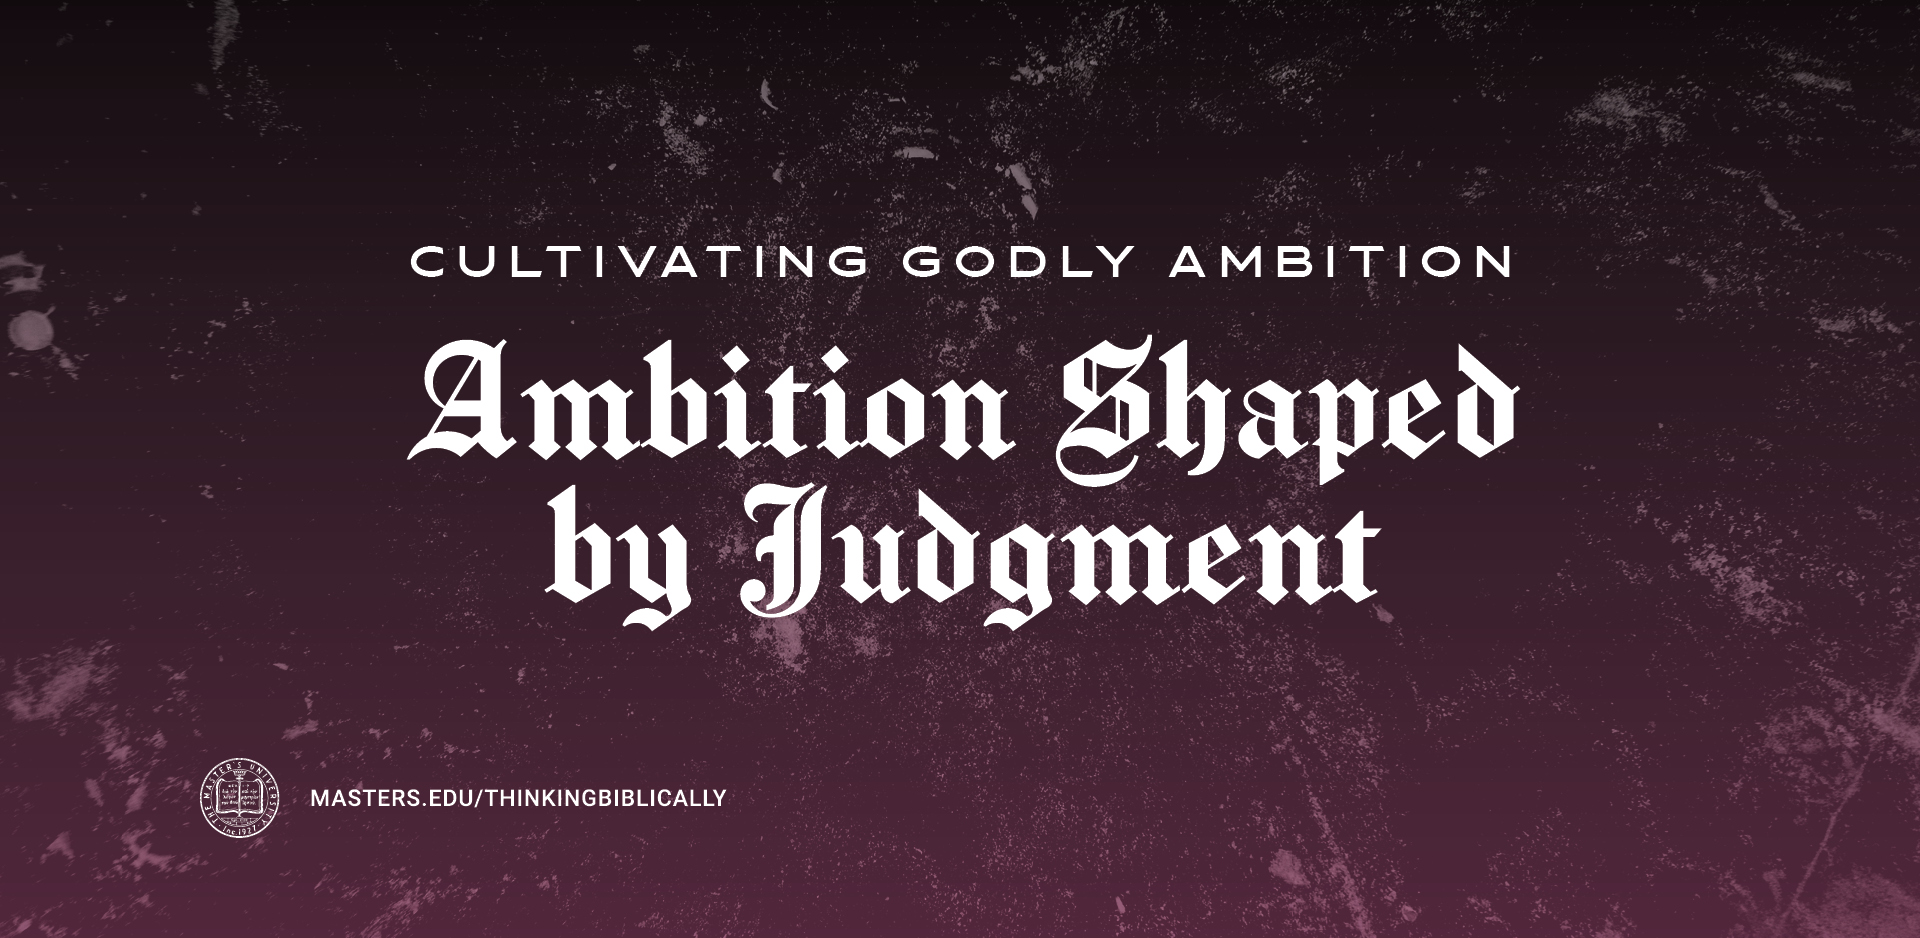 Ambition Shaped by Judgment Featured Image